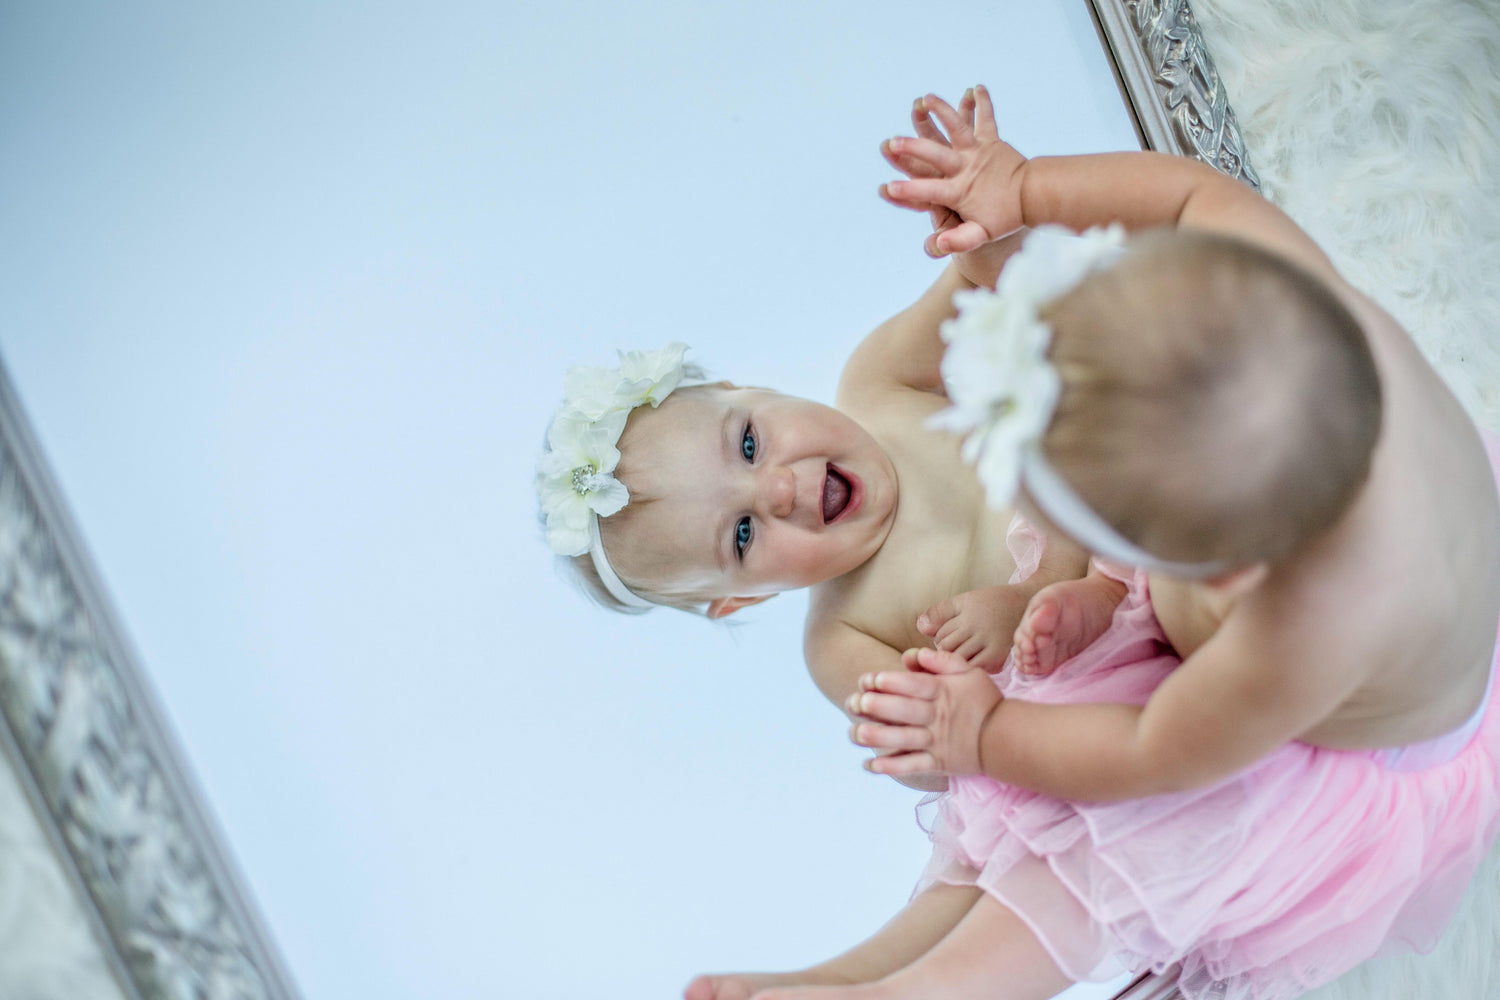 Why babies love mirrors and which ones you should get - Learning Time HK